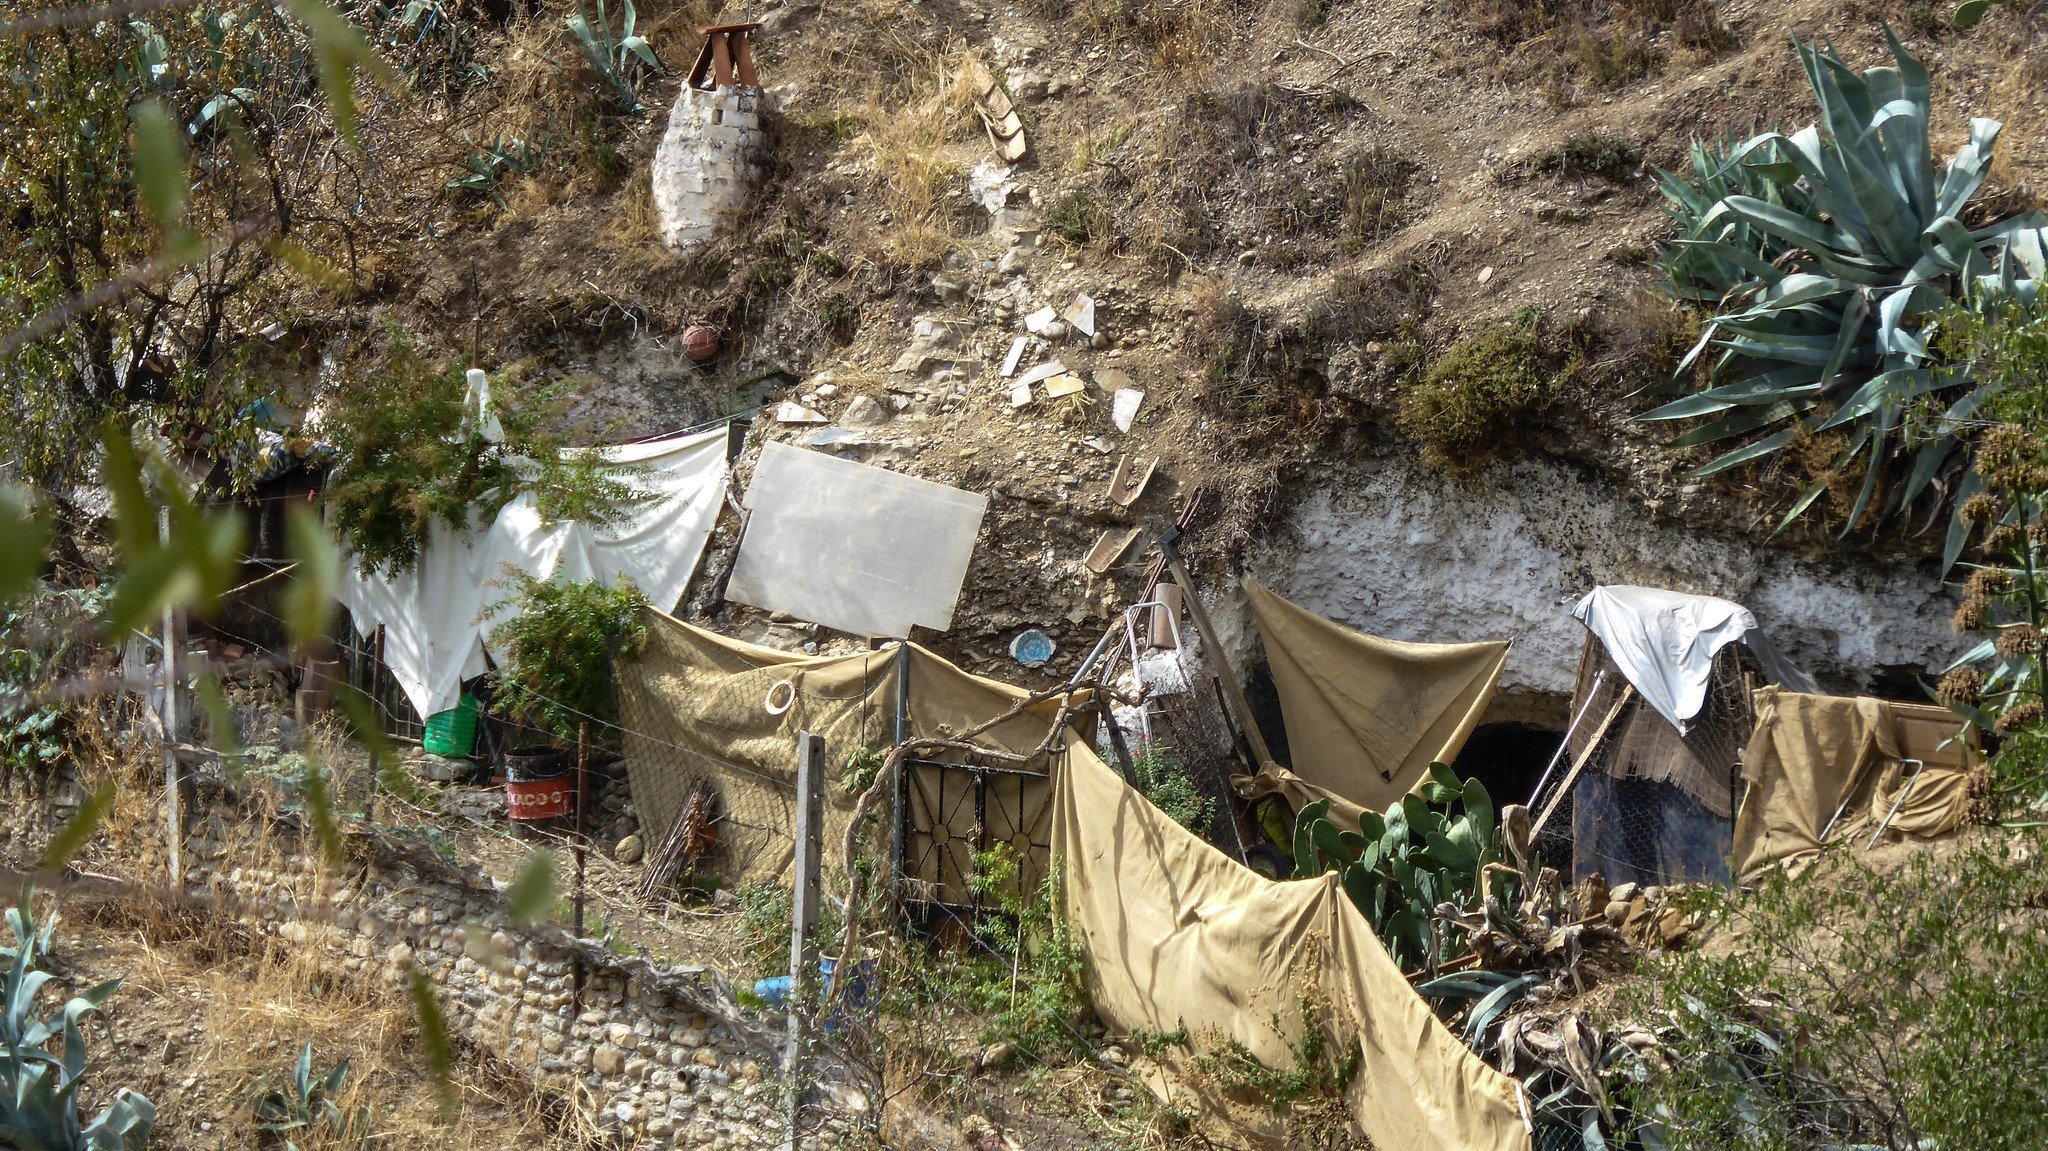 Cave dwellings of the gypsies of the Sacromonte the hill of Valparaíso in Granada, Spain